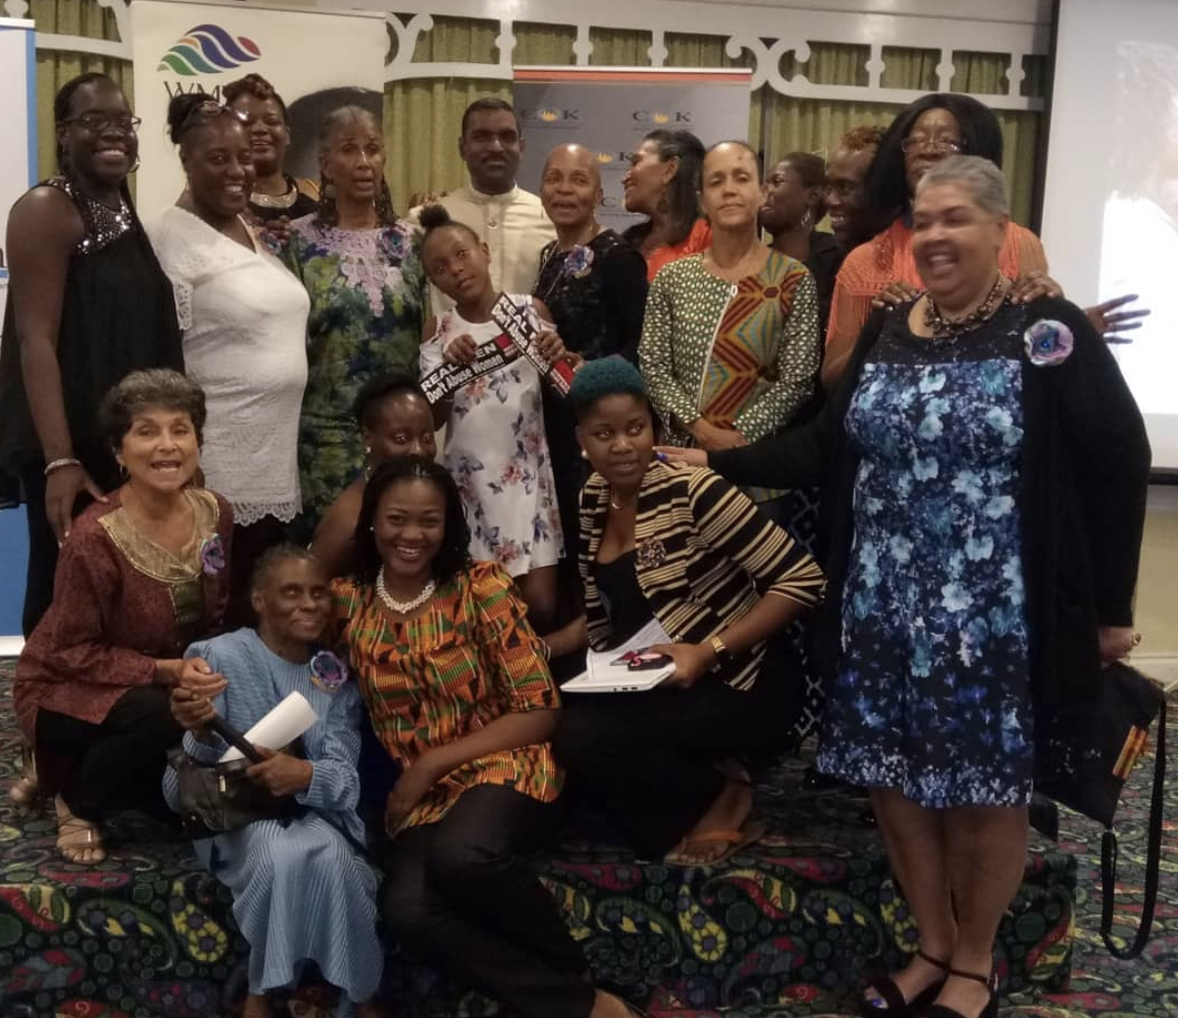 Here I am with my WMW Jamaica sisters at our organisation's 30th anniversary celebration. Here's to many more years of intergenerational strength through ART (advocacy, research, training) with heart!